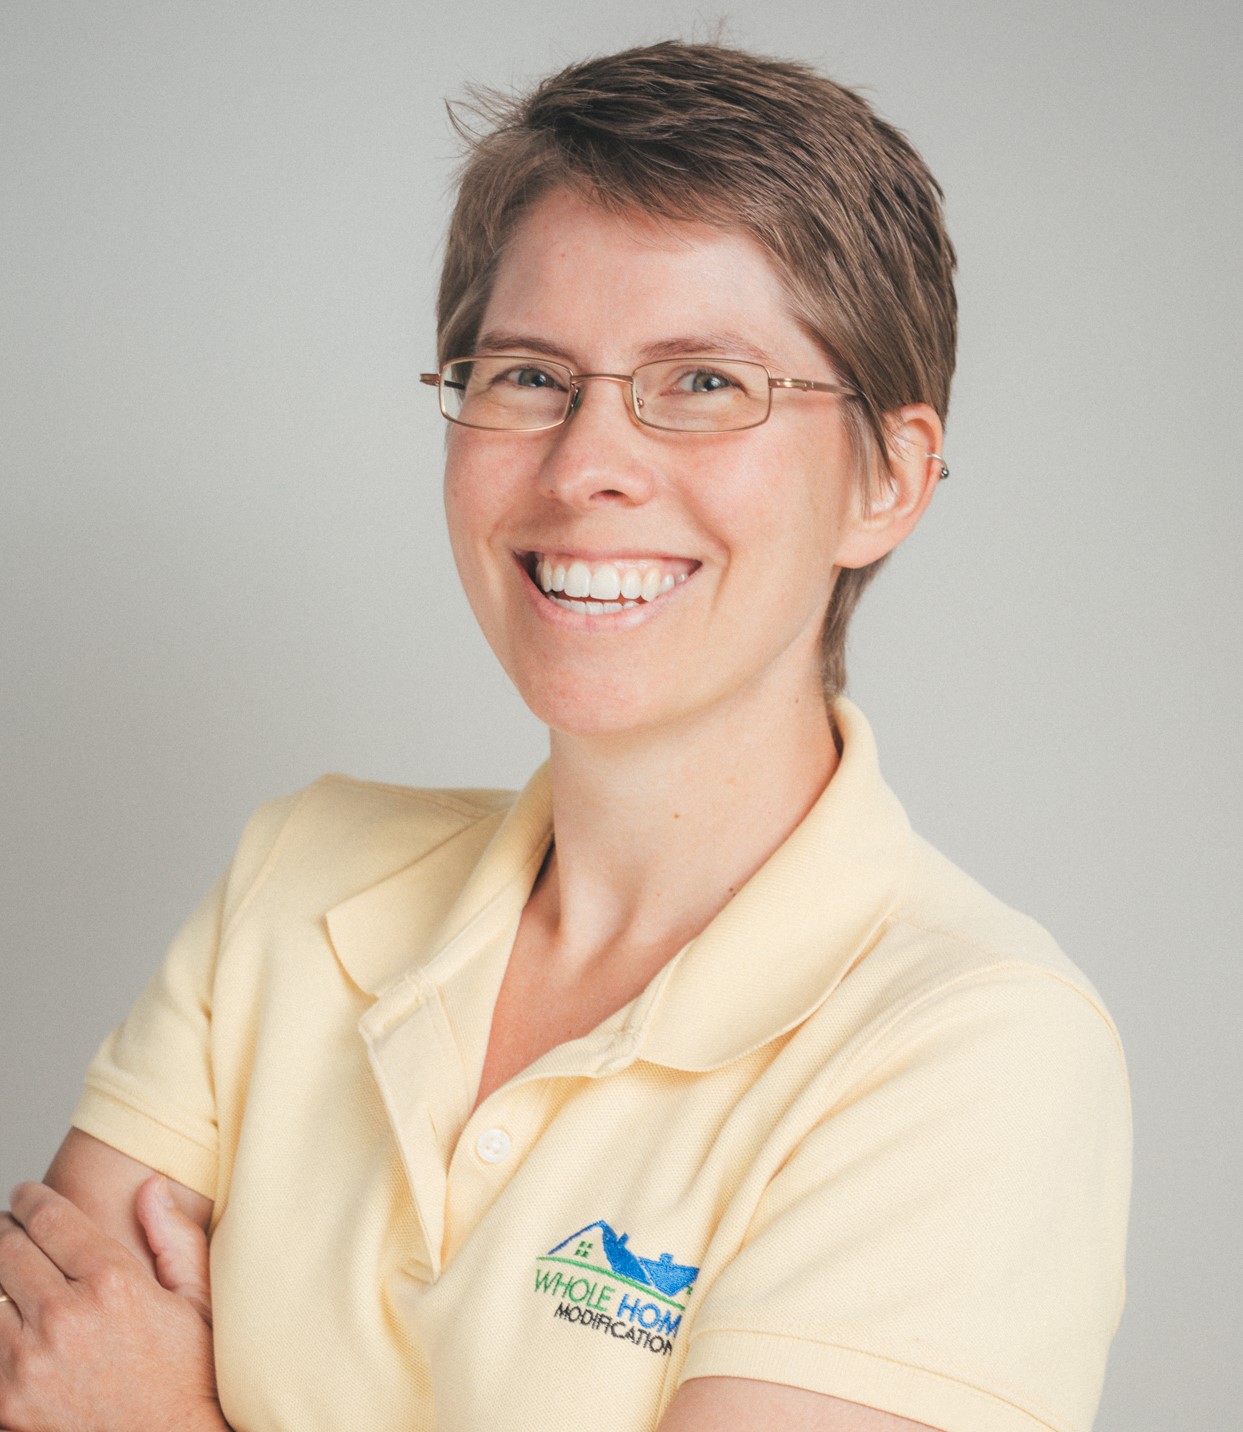 Sara has worked in residential construction for 20 years and has been making homes accessible for many of those years. She is a Certified Aging in Place Specialist as well as a certified facilitator of the evidence-based fall prevention program Stepping On, and the OSHA-10 and 30 instructor.